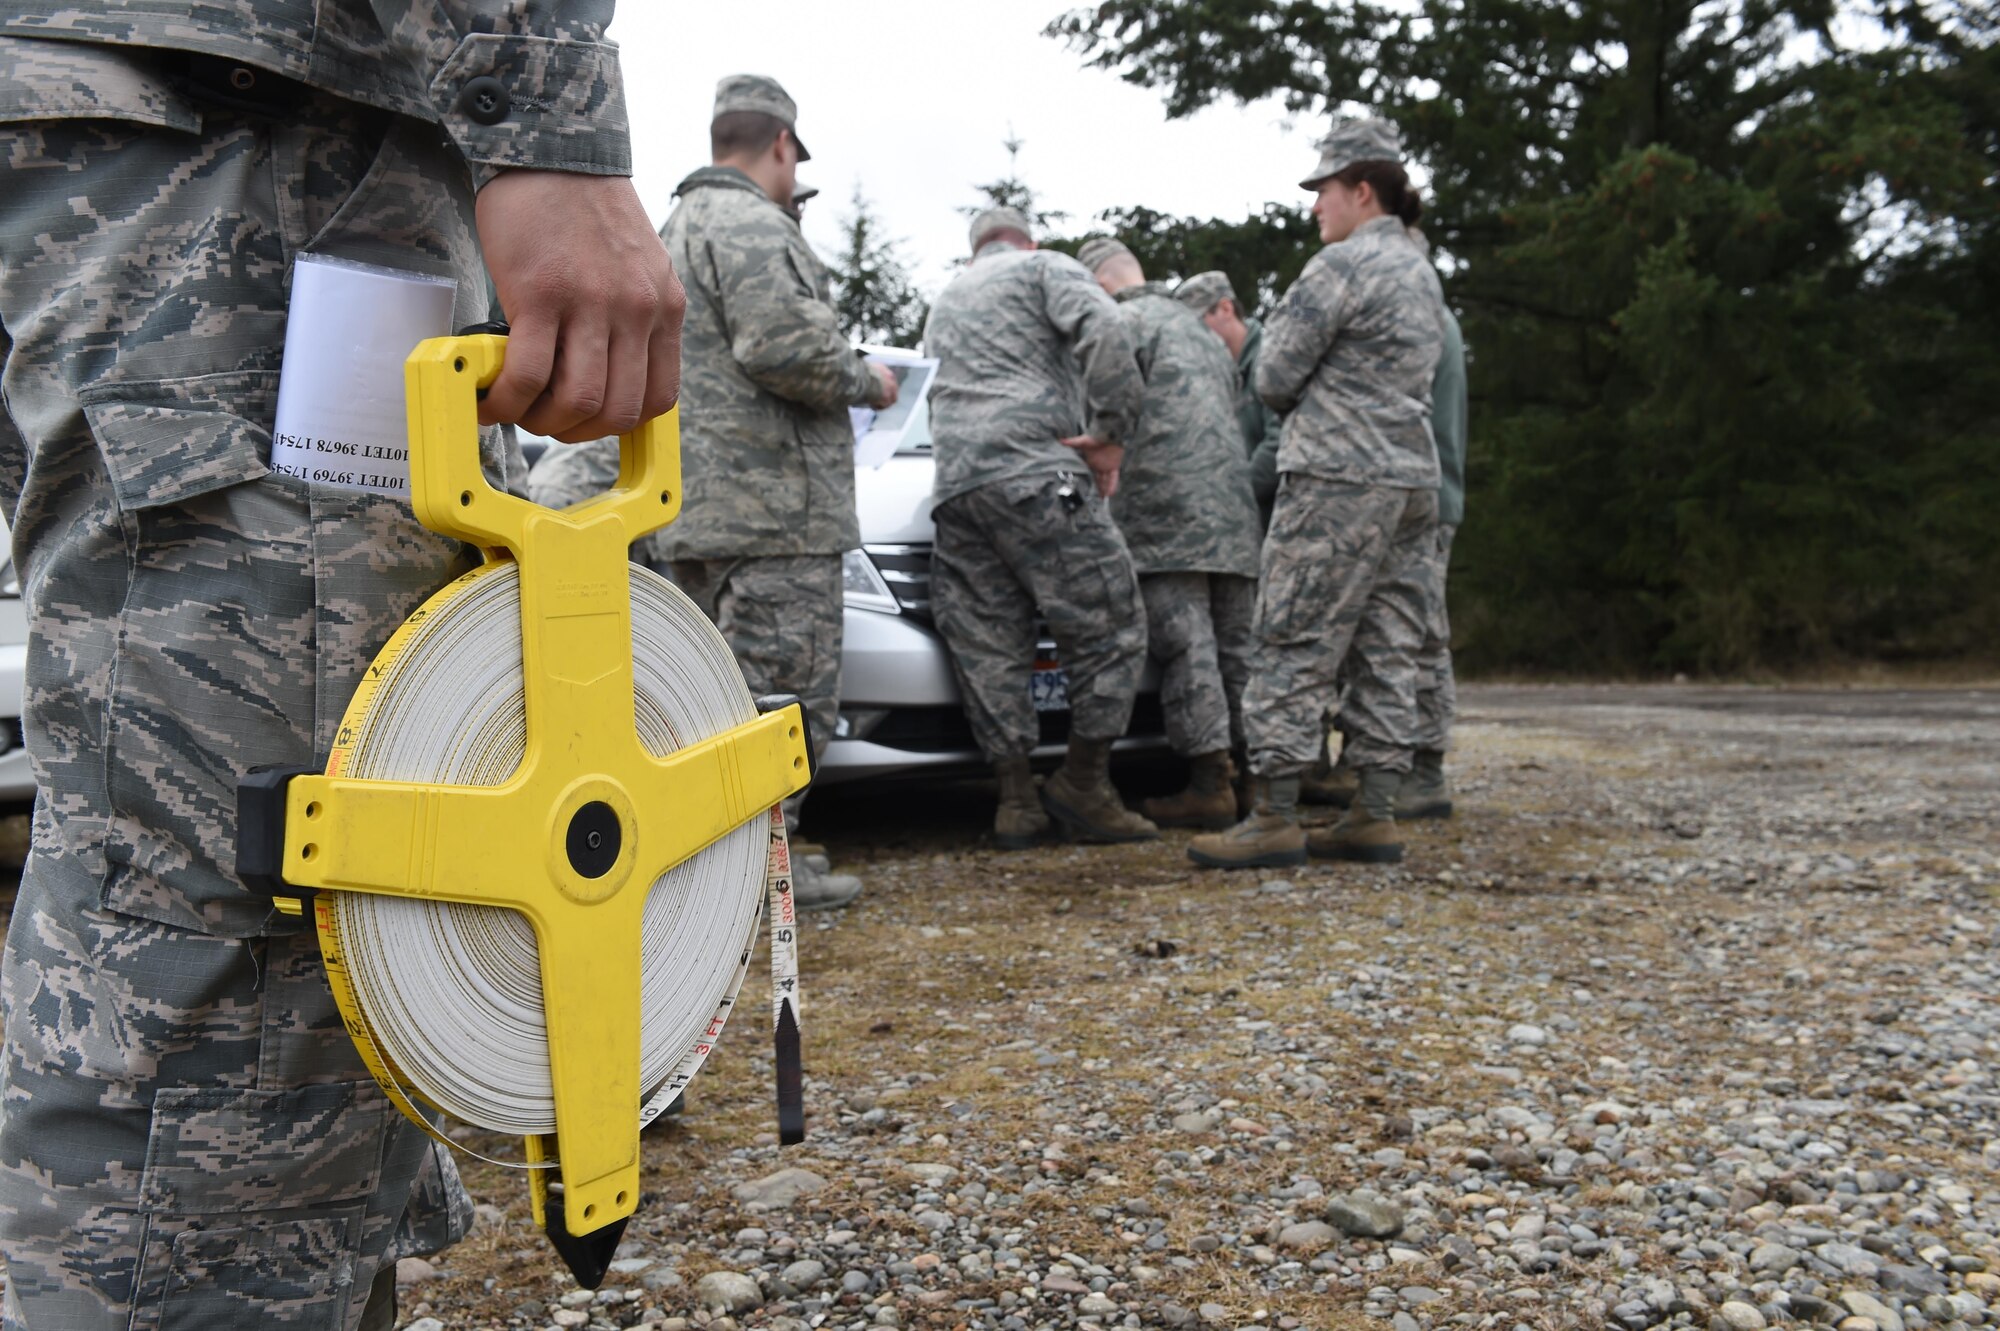 Staff Sgt. Jesse Reyes, 627th Security Forces Squadron combat arms instructor, holds measuring tape prior to the 627th Civil Engineer Squadron’s land navigation training on Joint Base Lewis-McChord, Wash., Feb. 16, 2017. More than 50 627th CES Airmen participated in the training here where they learned map orientation, grade ordinates and how to use an azimuth. (U.S. Air Force photo/Staff Sgt. Naomi Shipley)